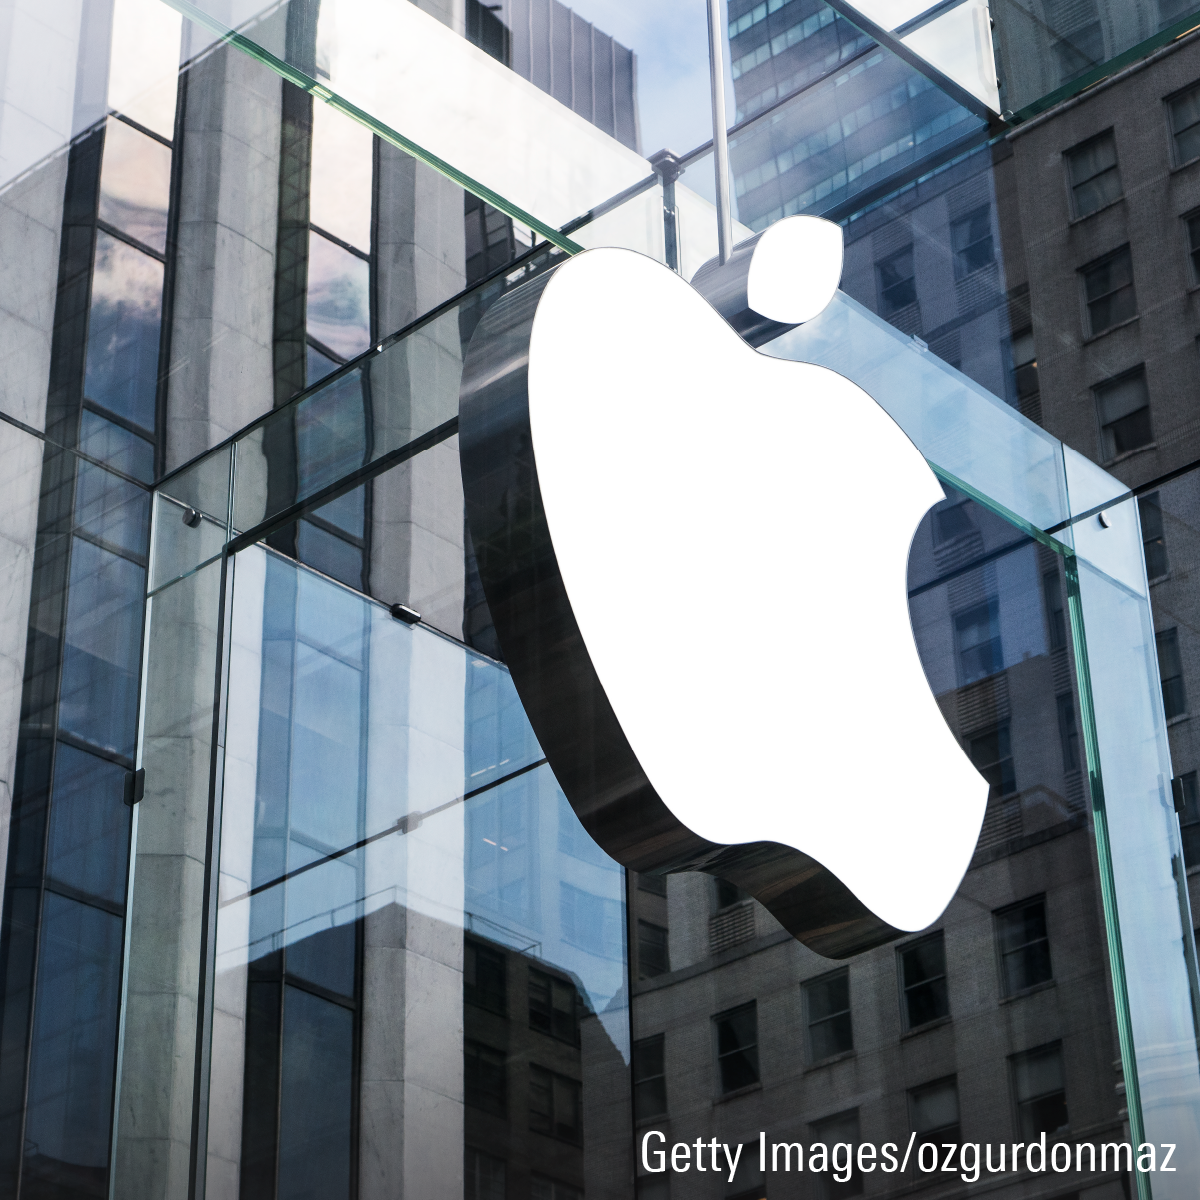 What to Expect at Apple’s Annual Meeting